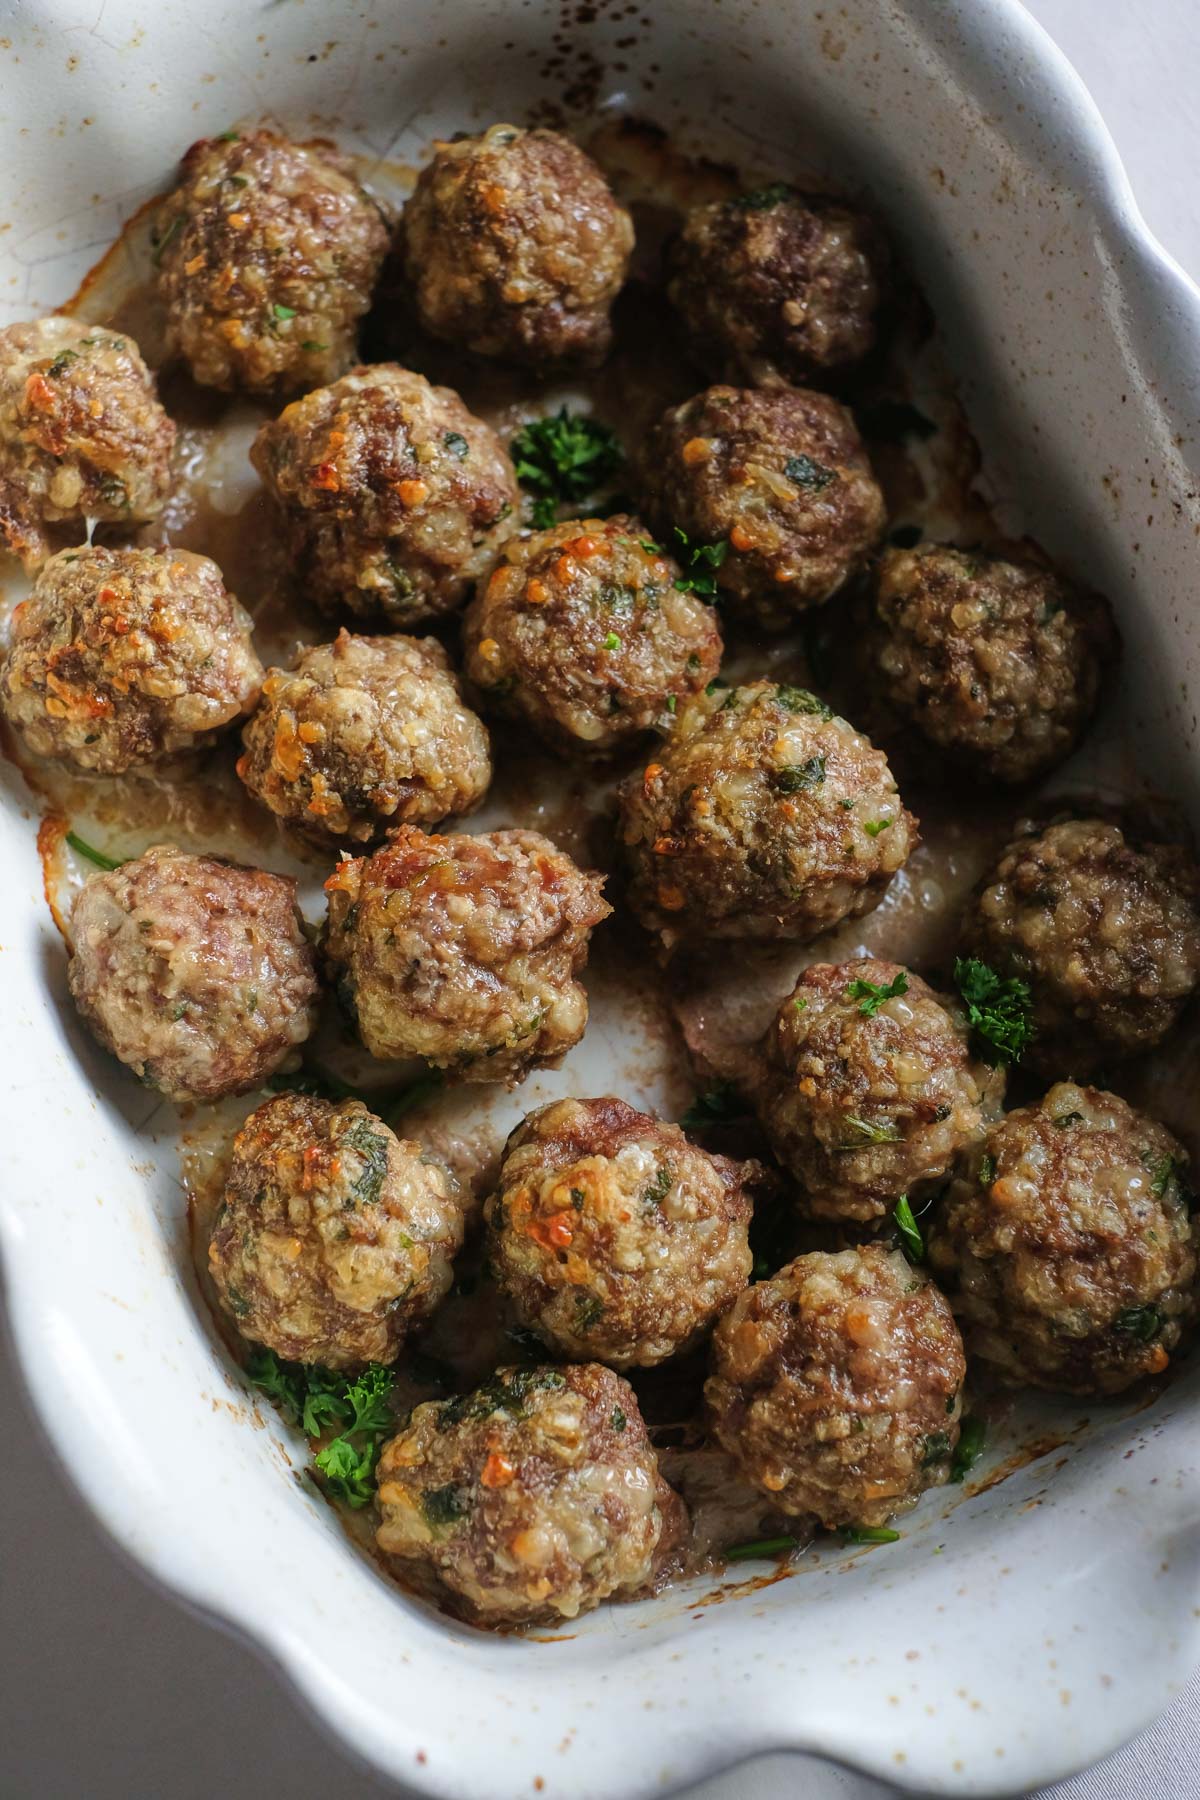 the completed how to bake meatballs in the oven recipe